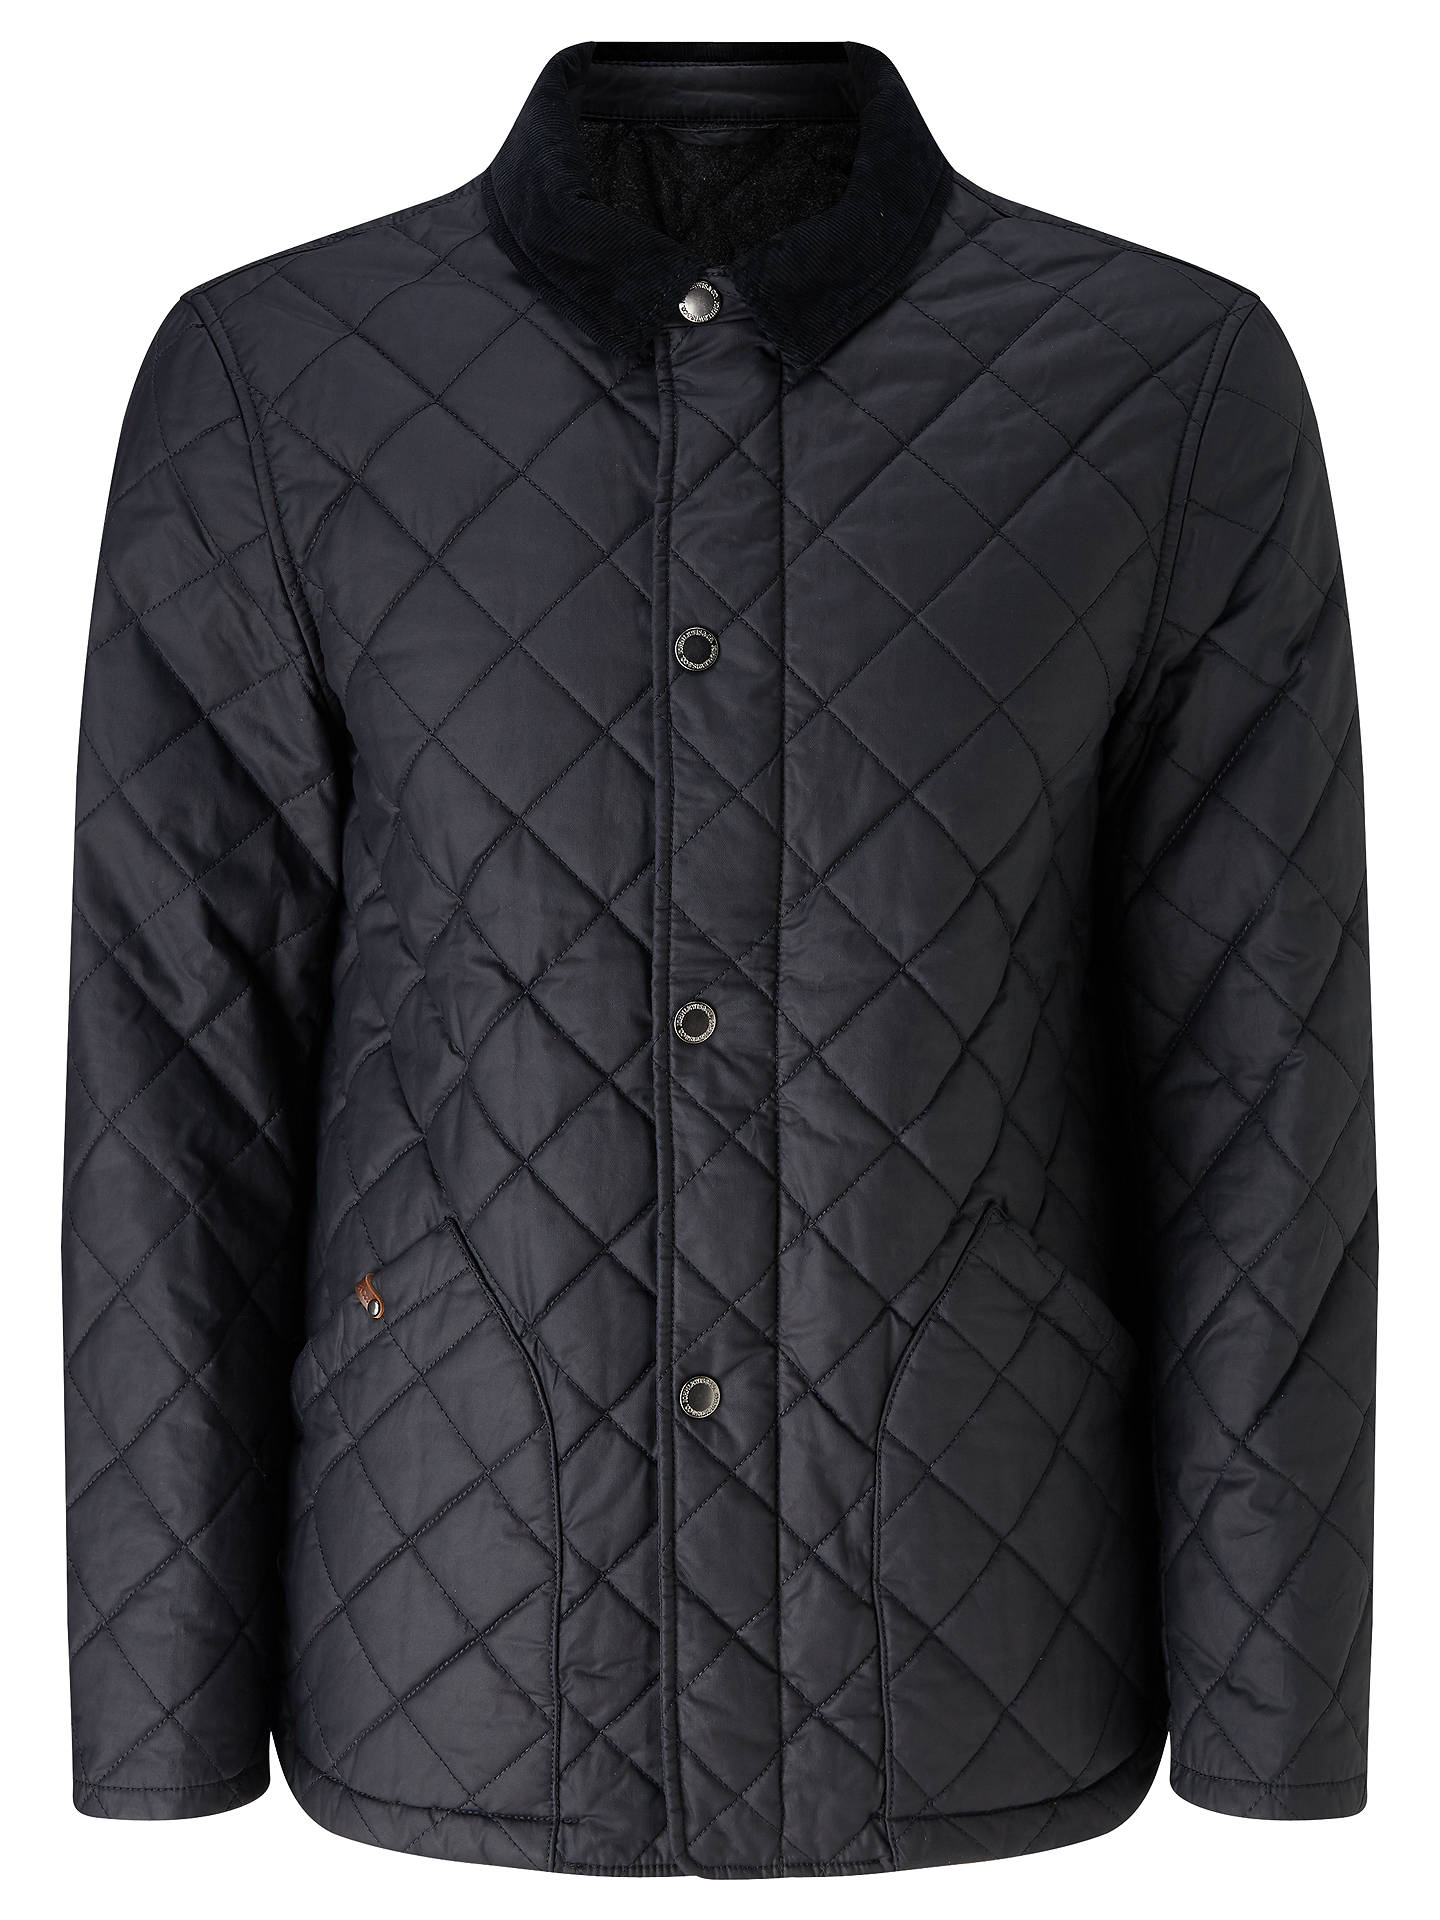 JOHN LEWIS & Co. Waxed Cotton Quilted Jacket at John Lewis & Partners